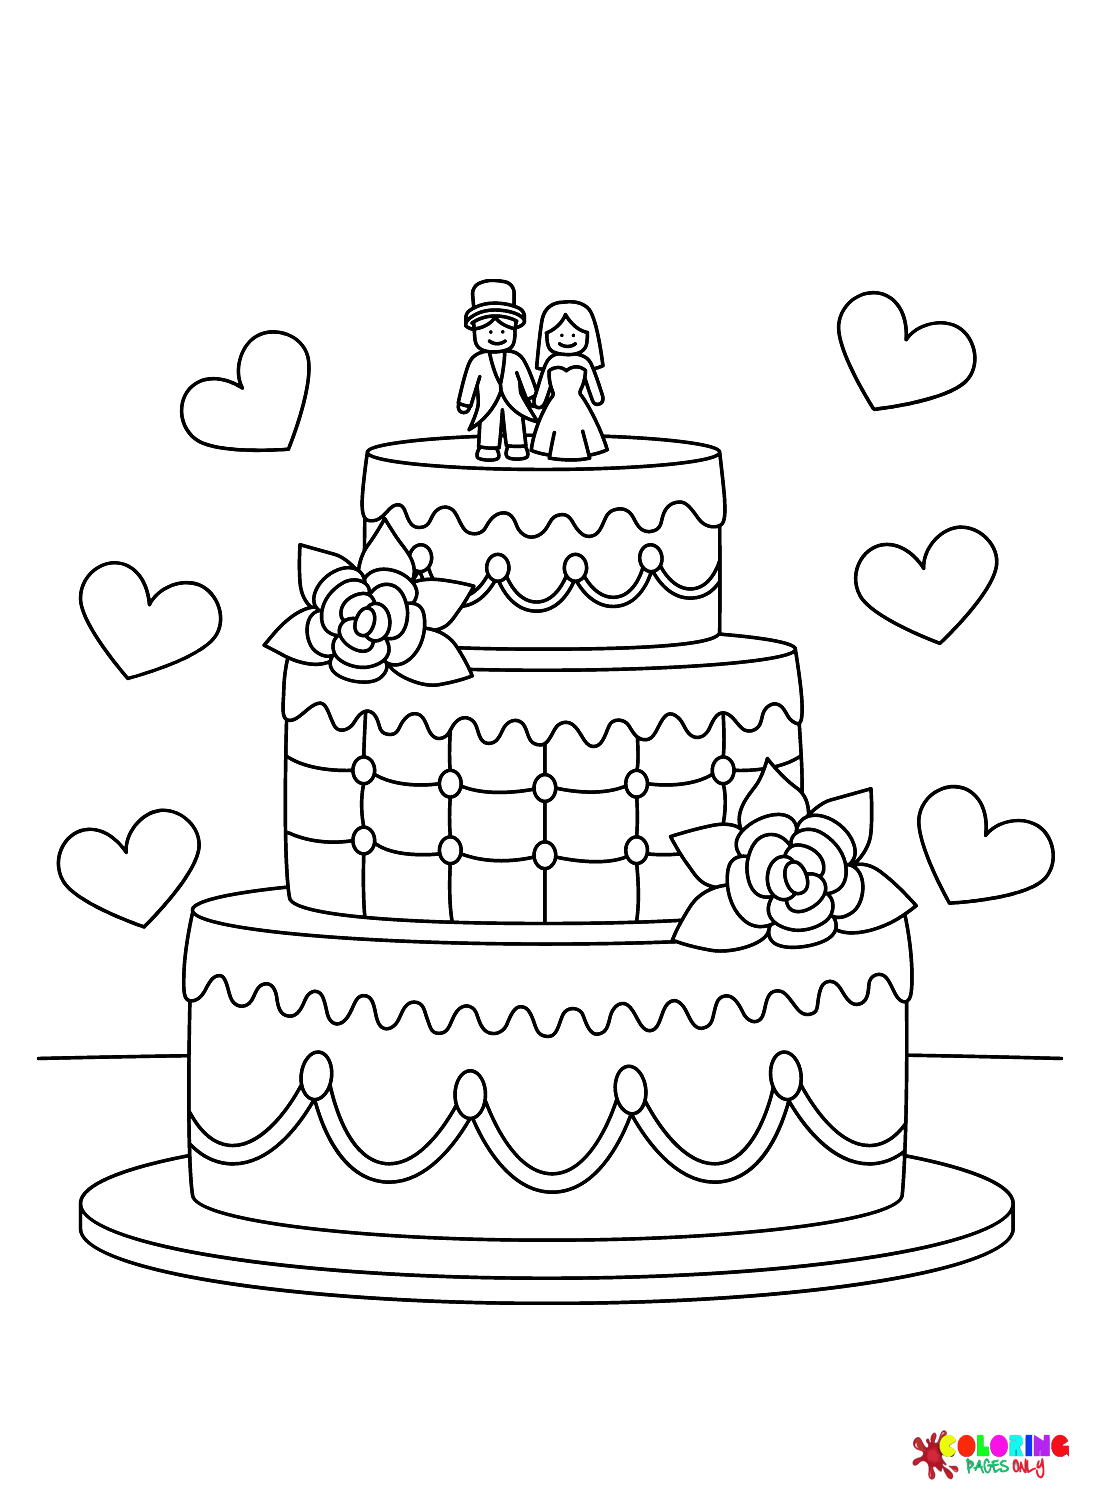 Wedding Cake with Bride and Groom Coloring Page